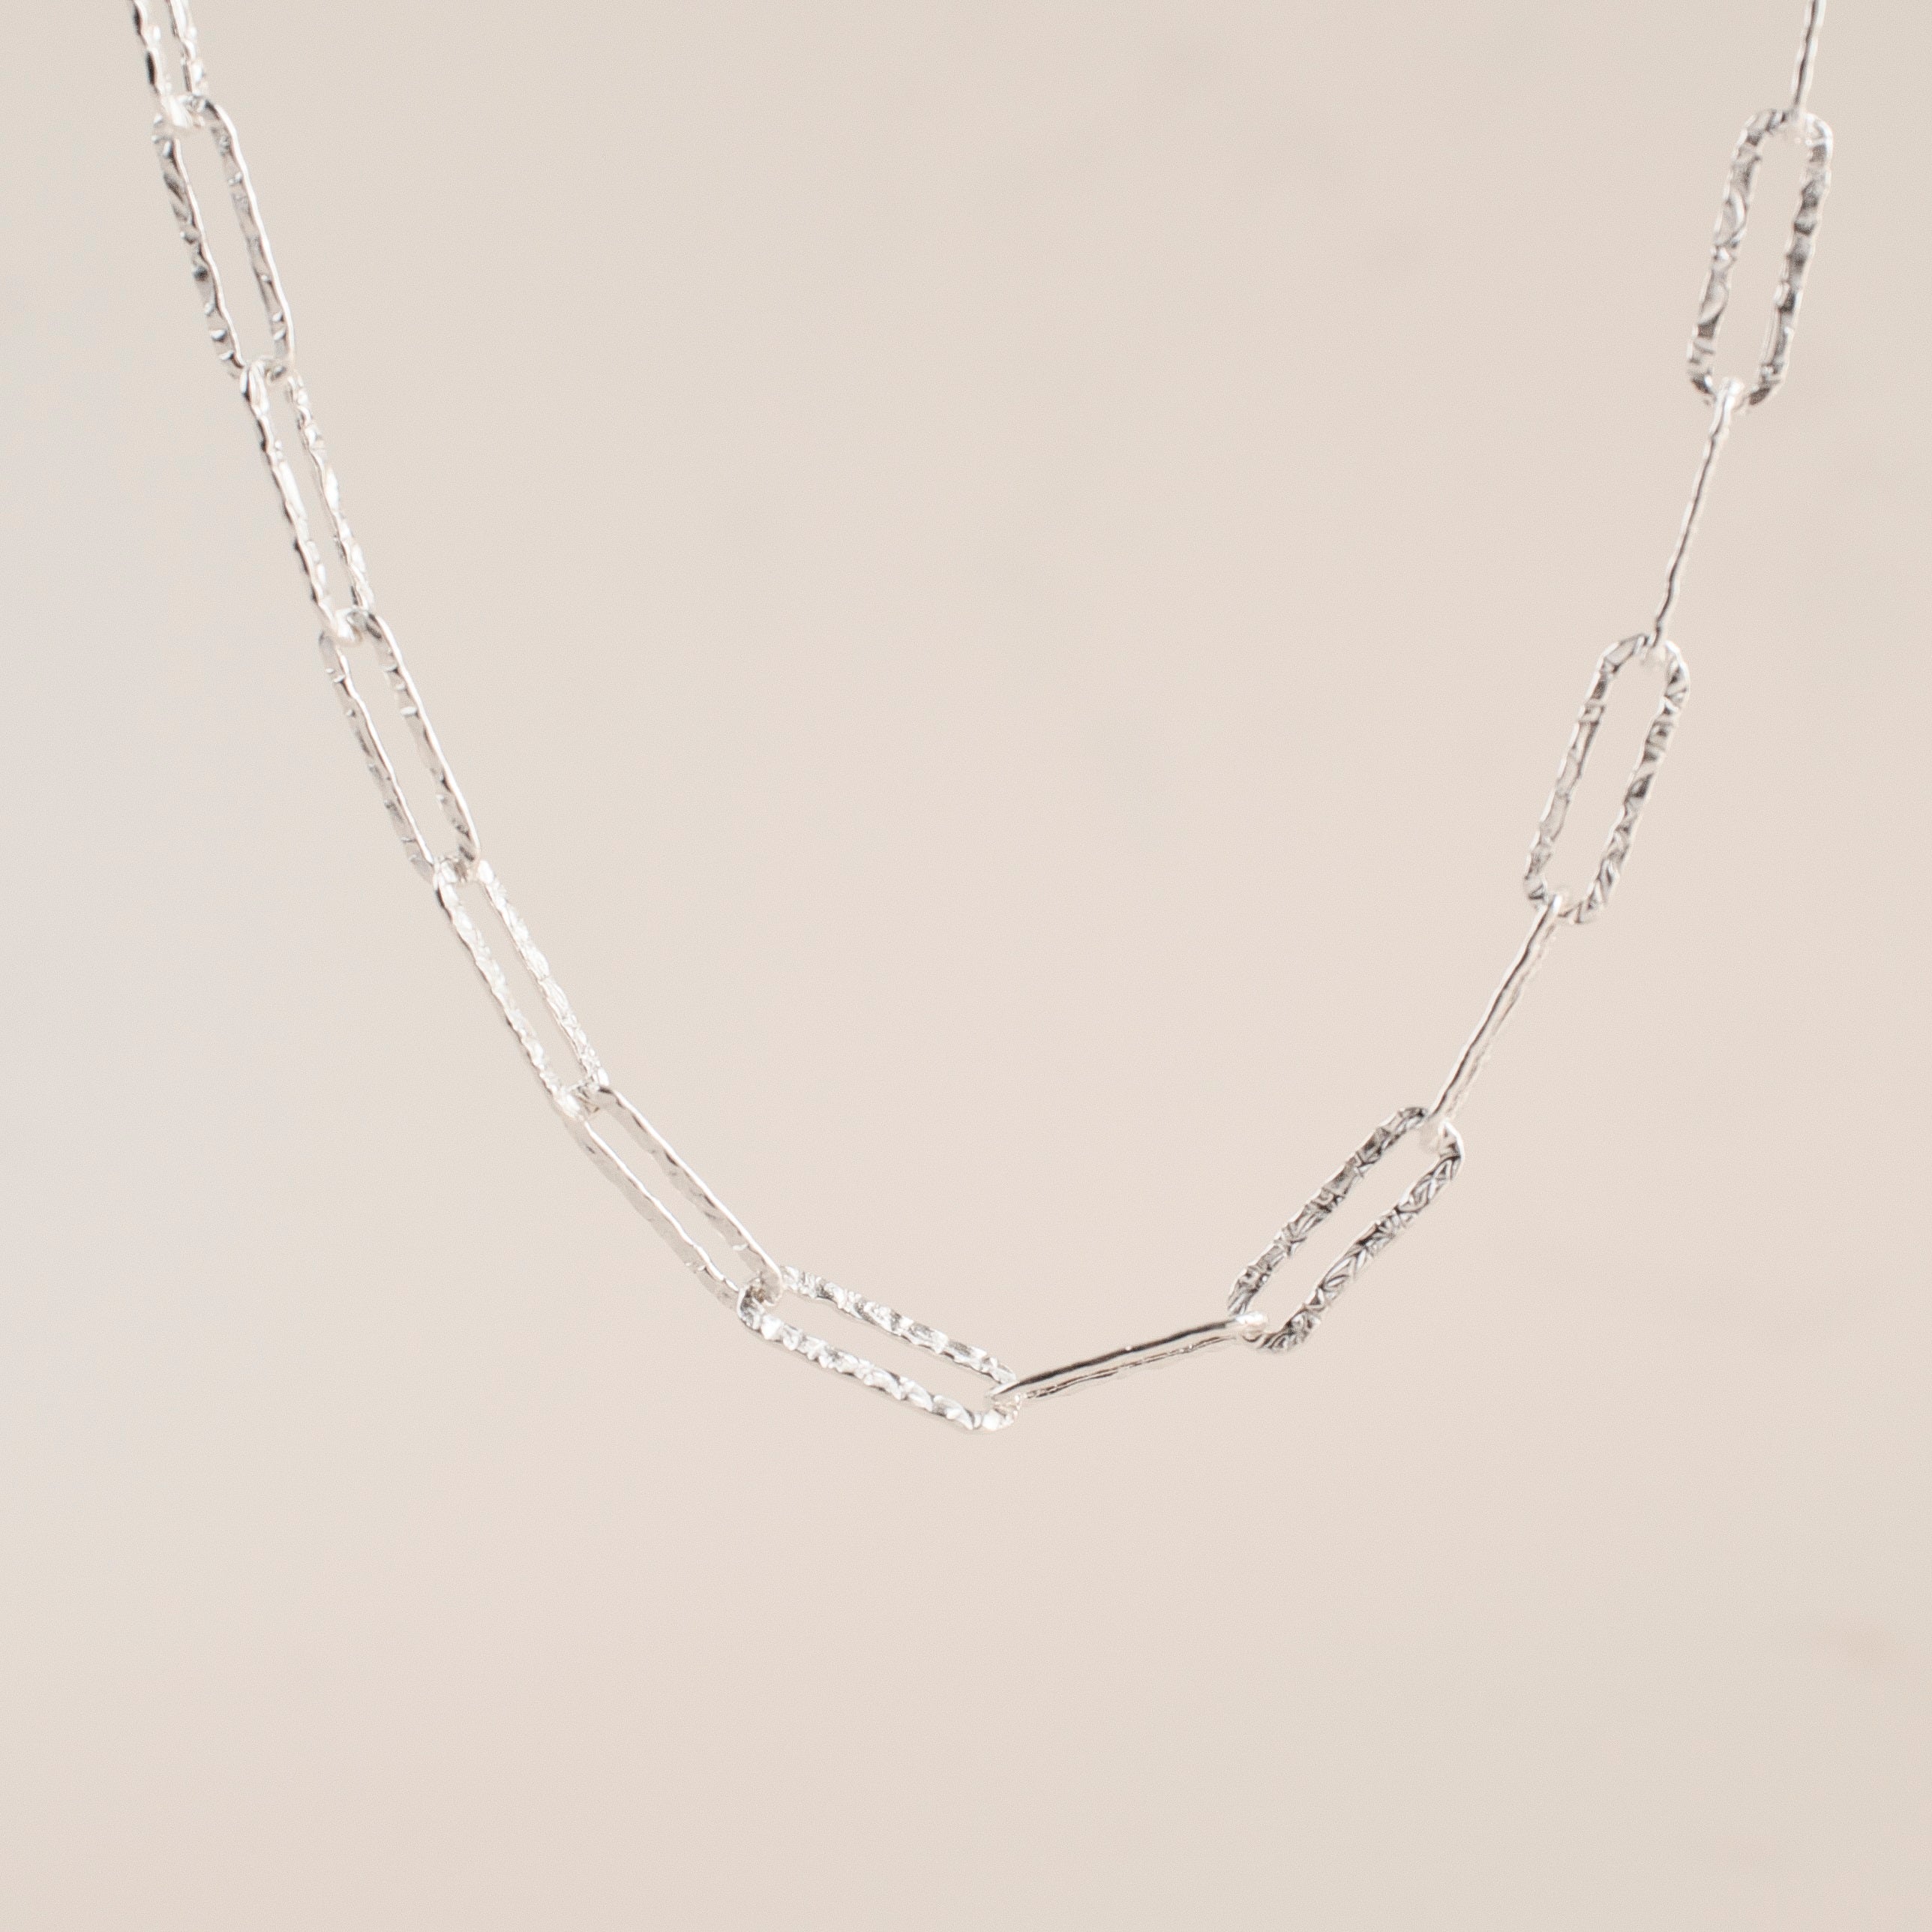 Solid-Link Necklace